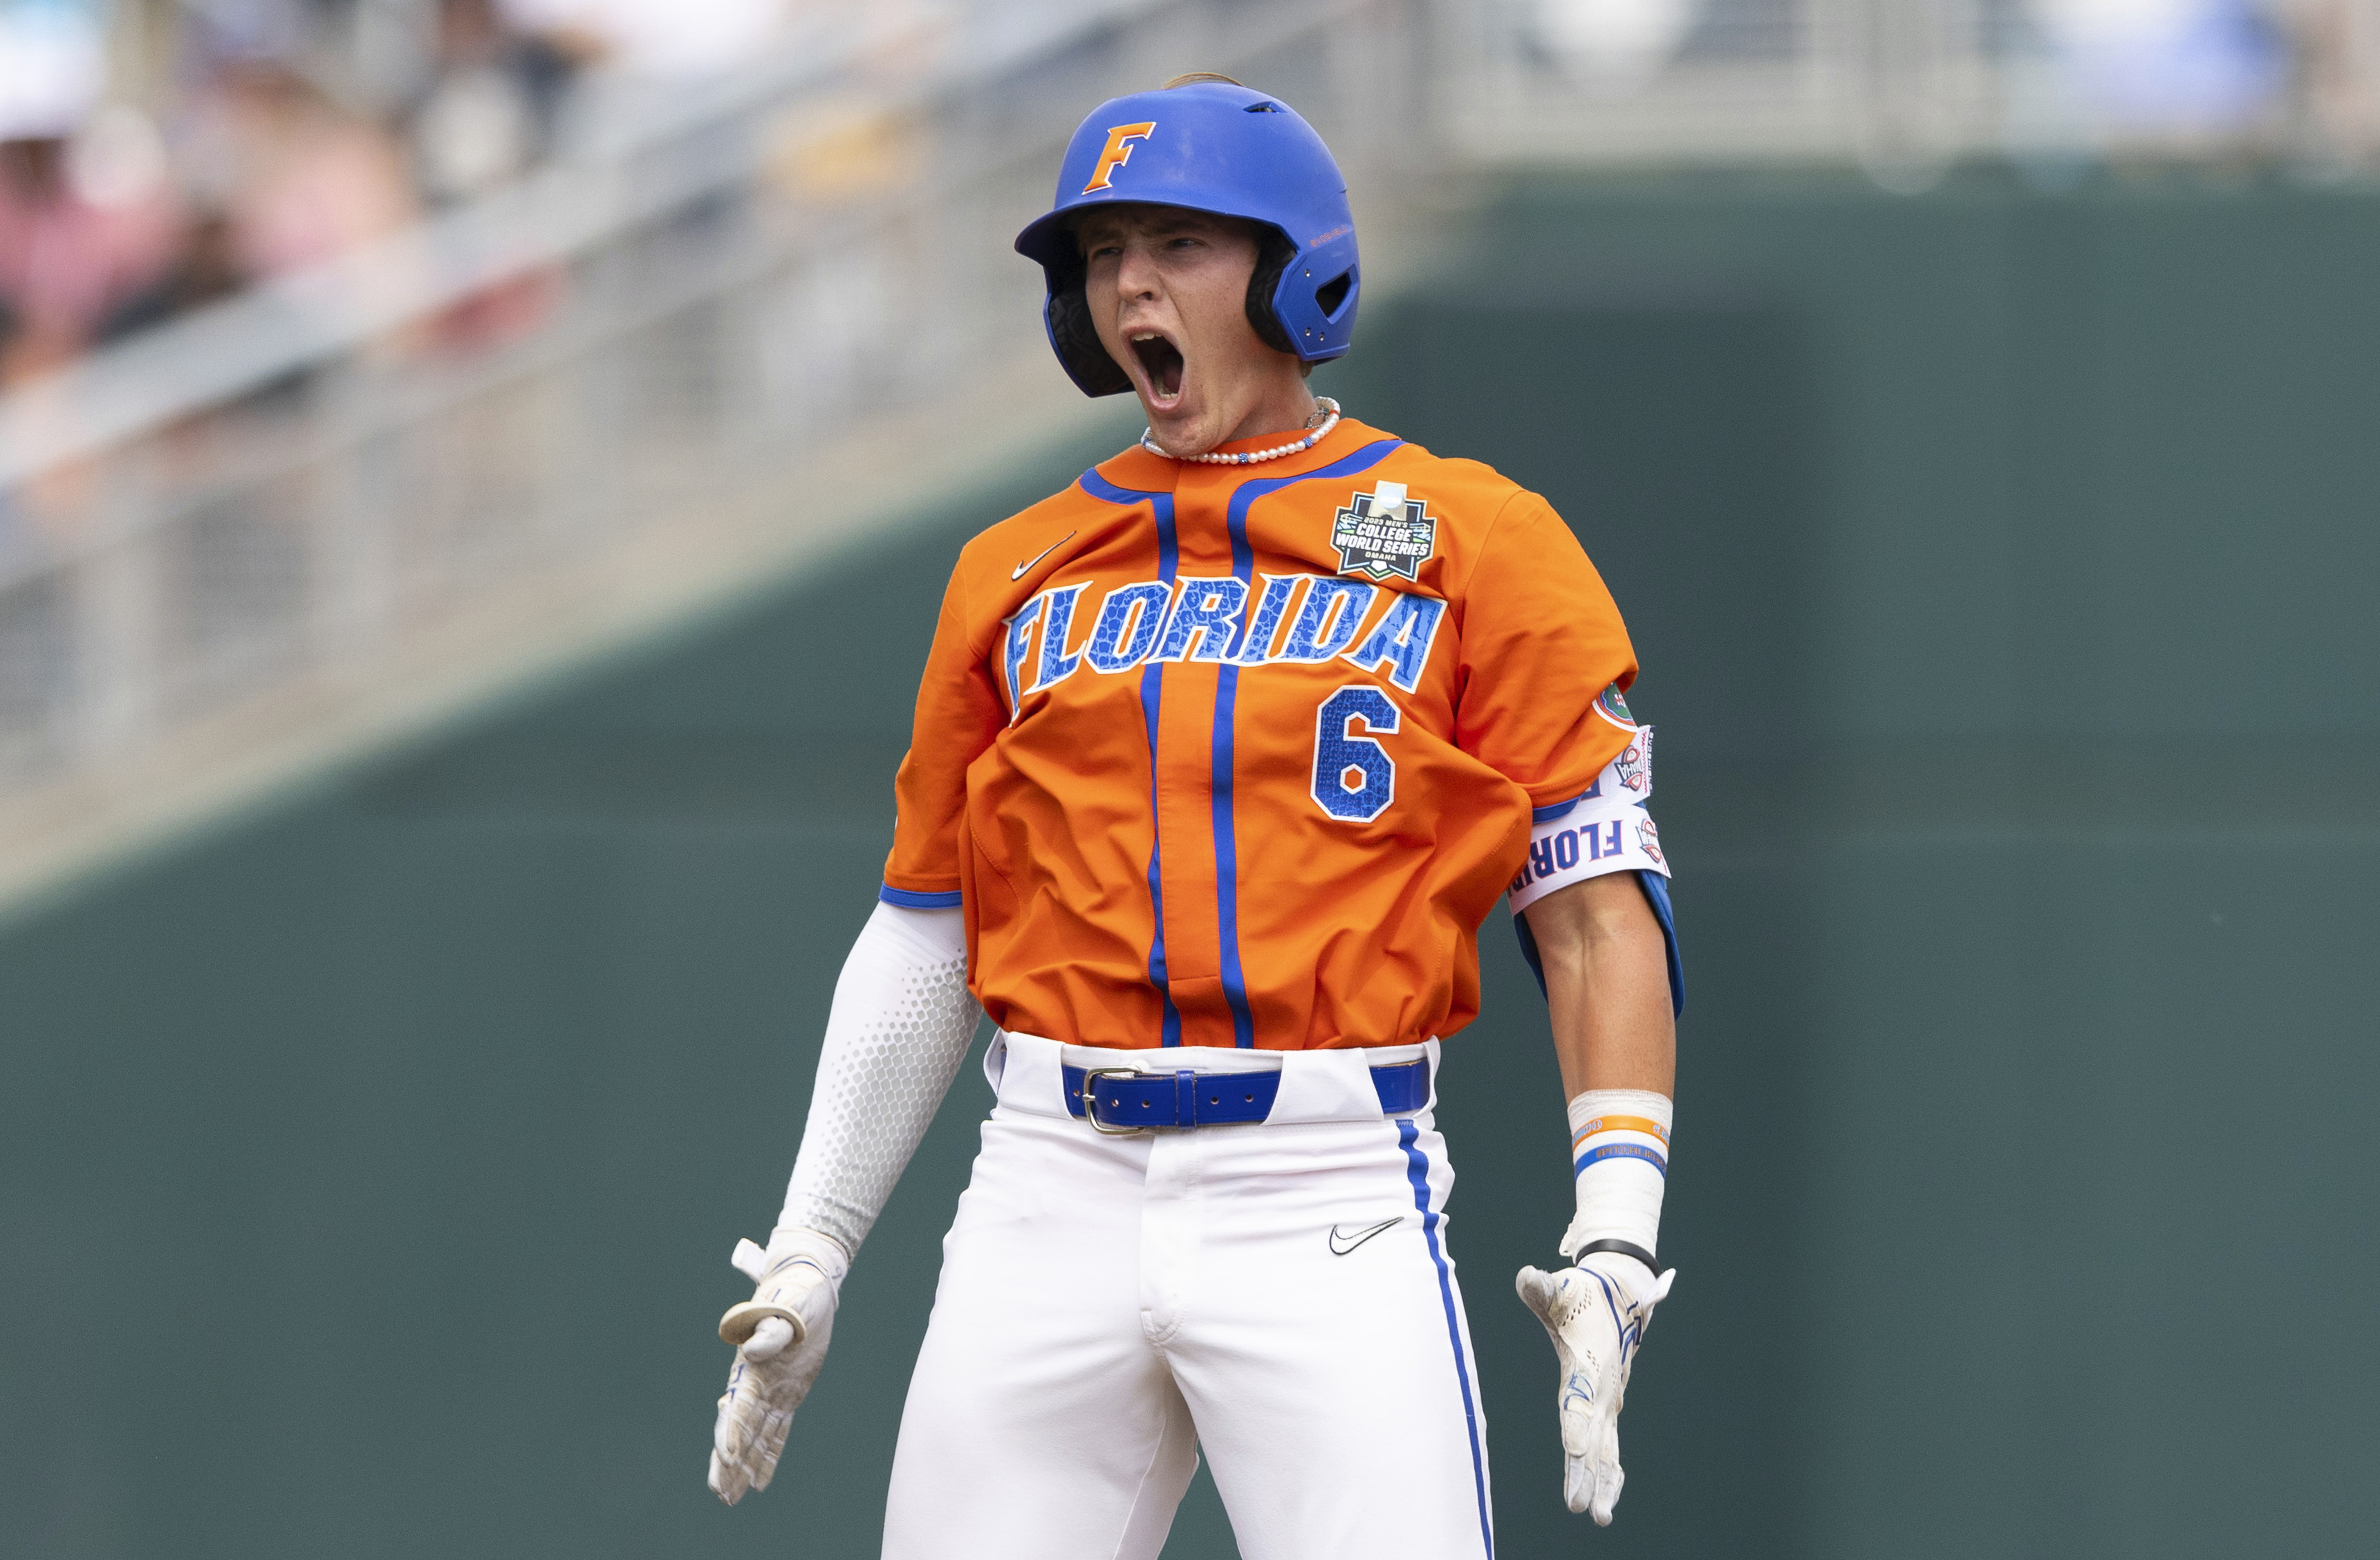 Gators lock up spot in College World Series finals with win over TCU